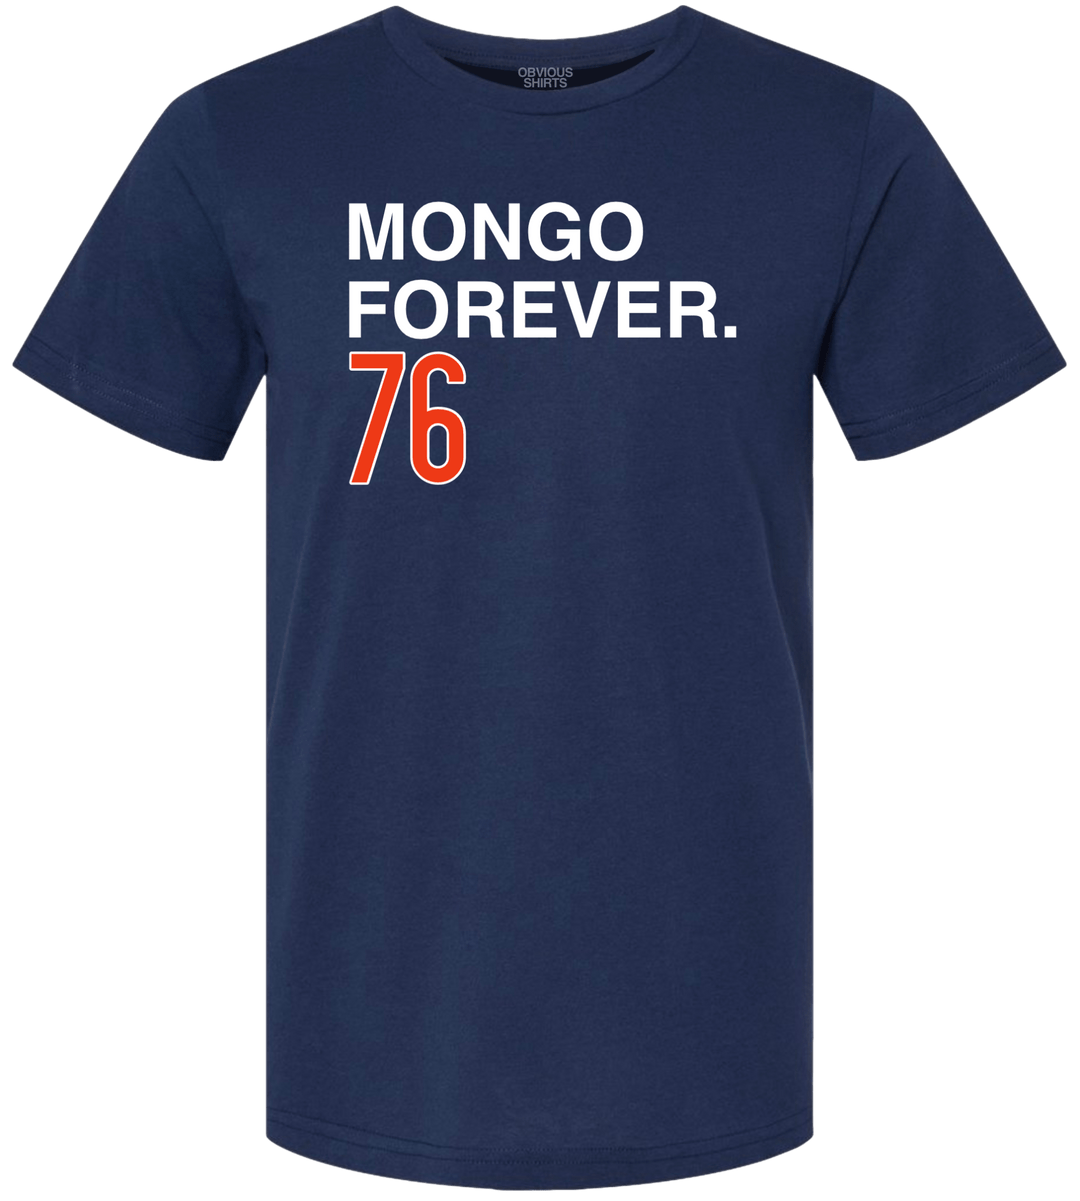 MONGO FOREVER. - OBVIOUS SHIRTS